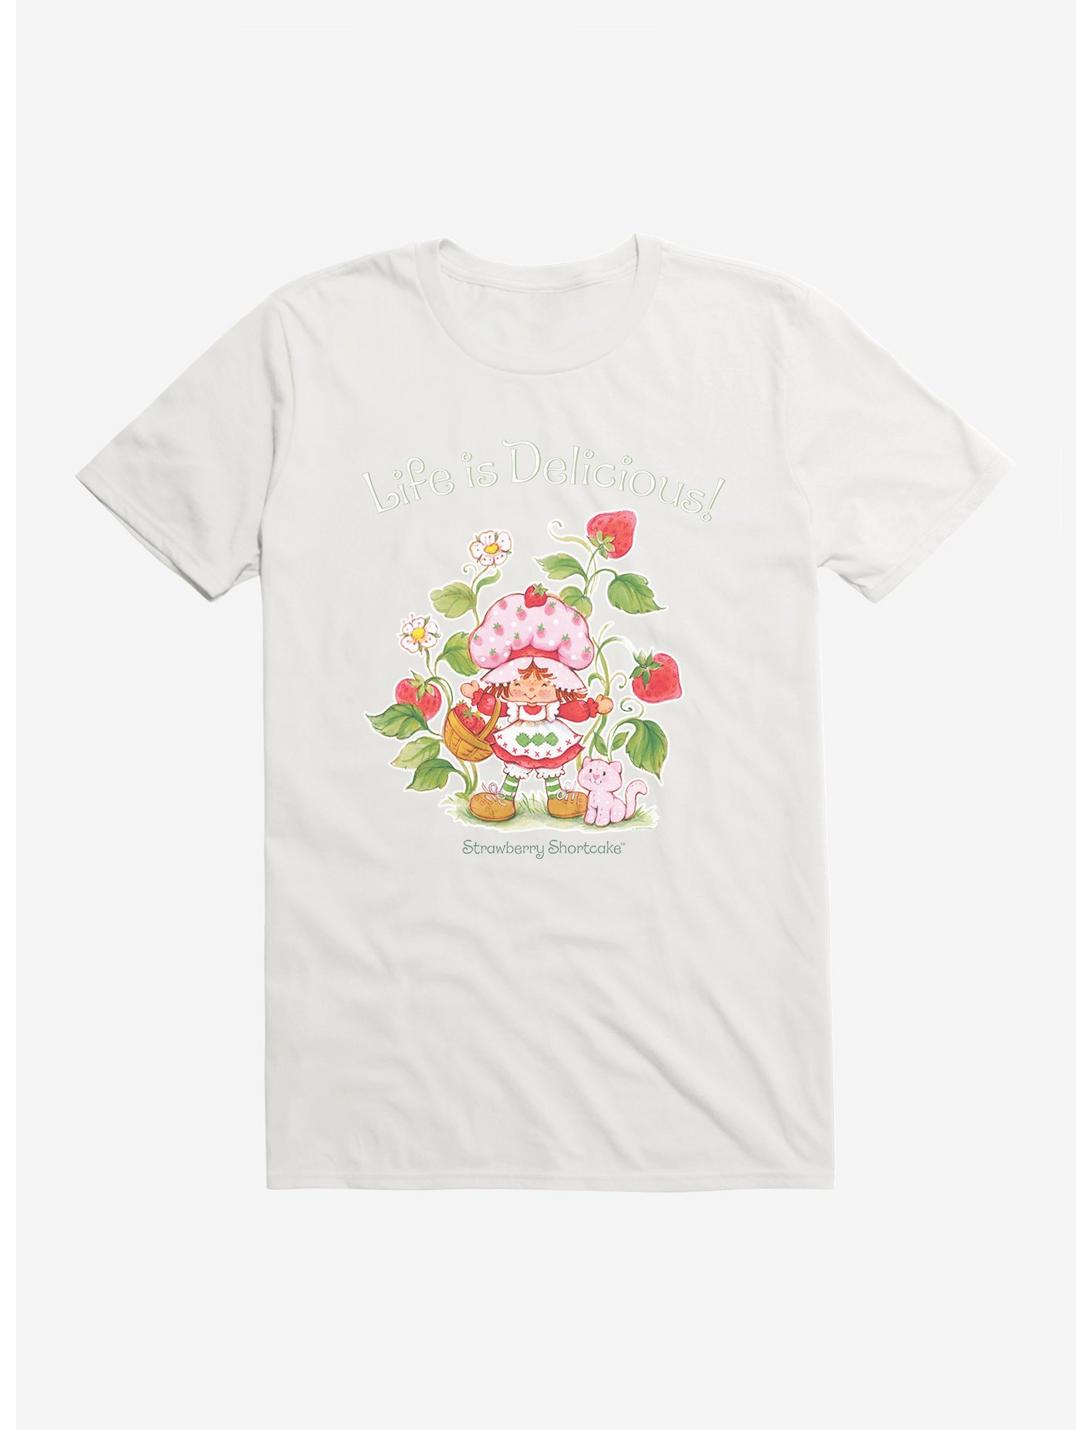 Strawberry Shortcake Life Is Delicious! T-Shirt, WHITE, hi-res